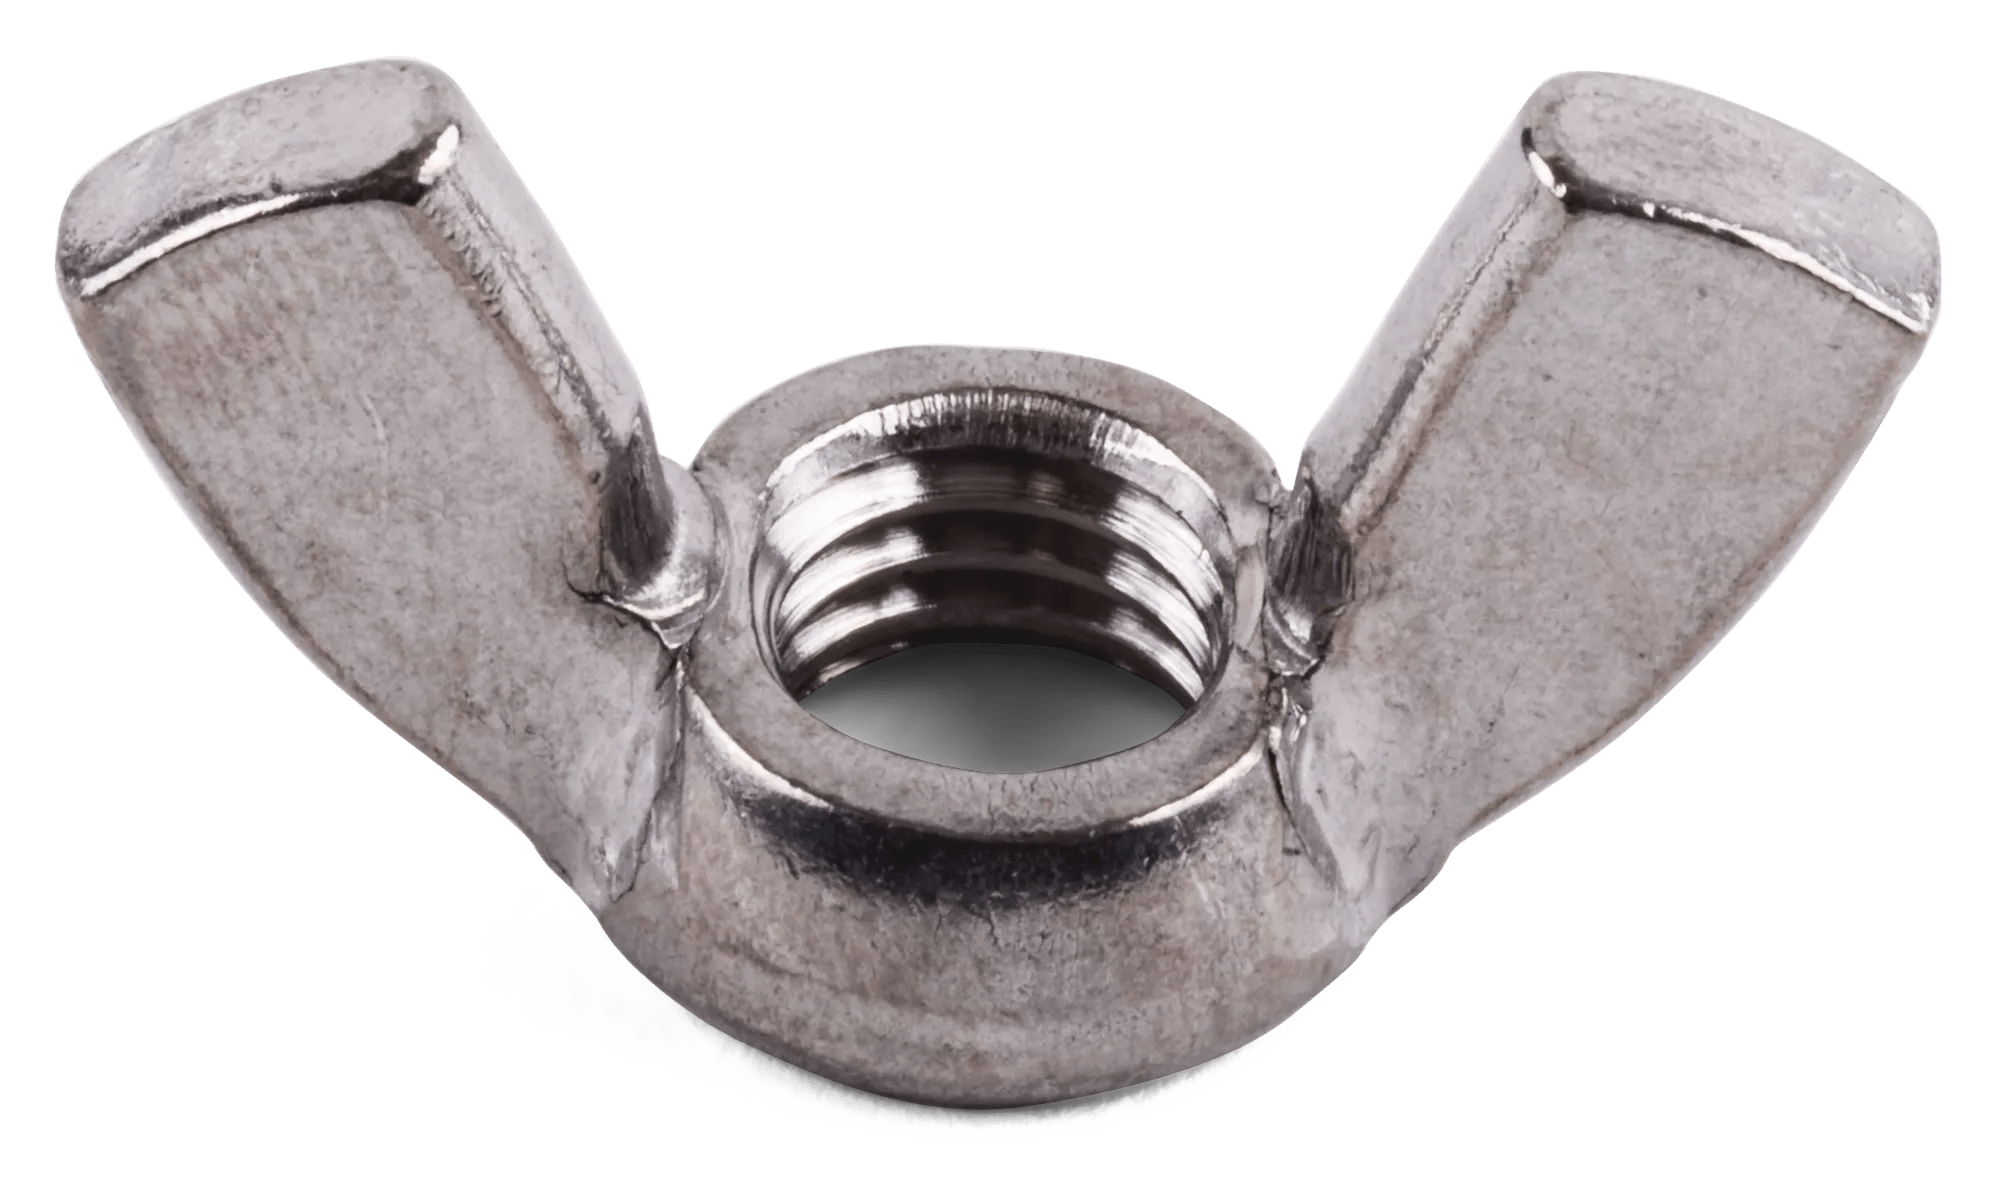 M5 x 0.8 18-8 Stainless Steel (Coarse Thread) Wing Nut